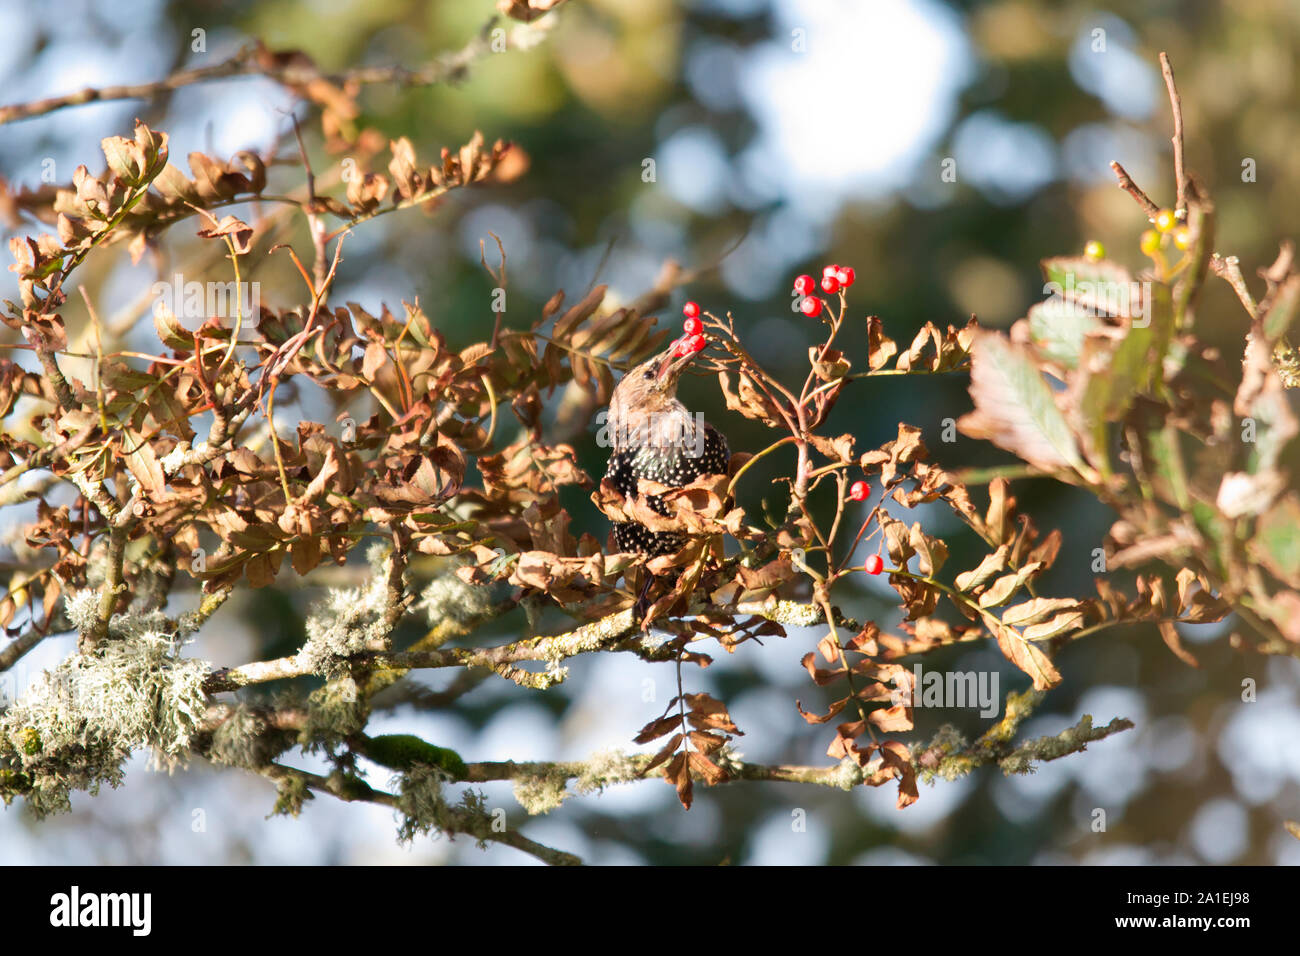 Starling feeding on berries, Orkney Isles Stock Photo